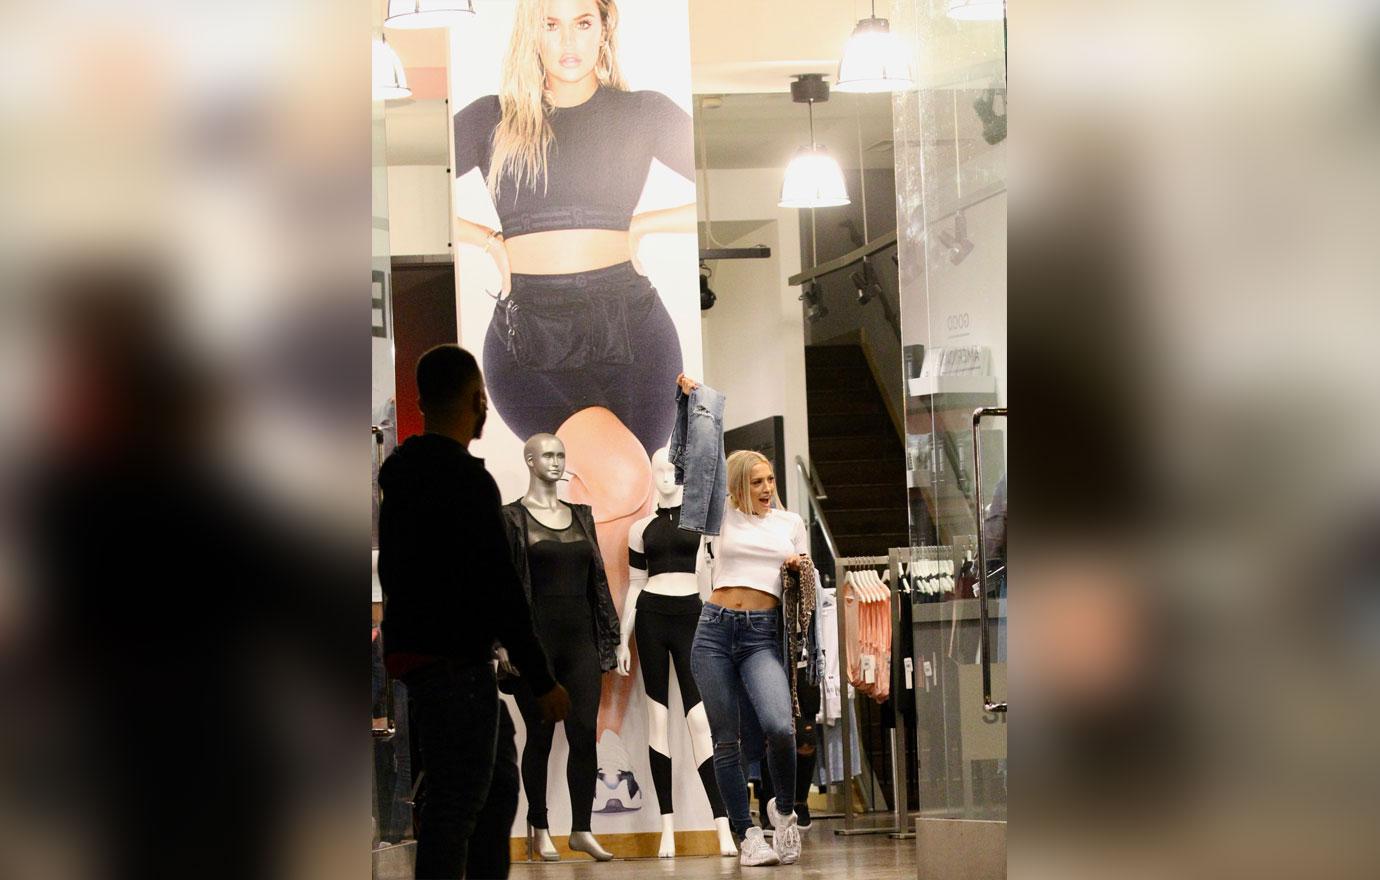 Fans slam Tammy Hembrow's braless look as 'unclassy' as she flashes  underboob shopping